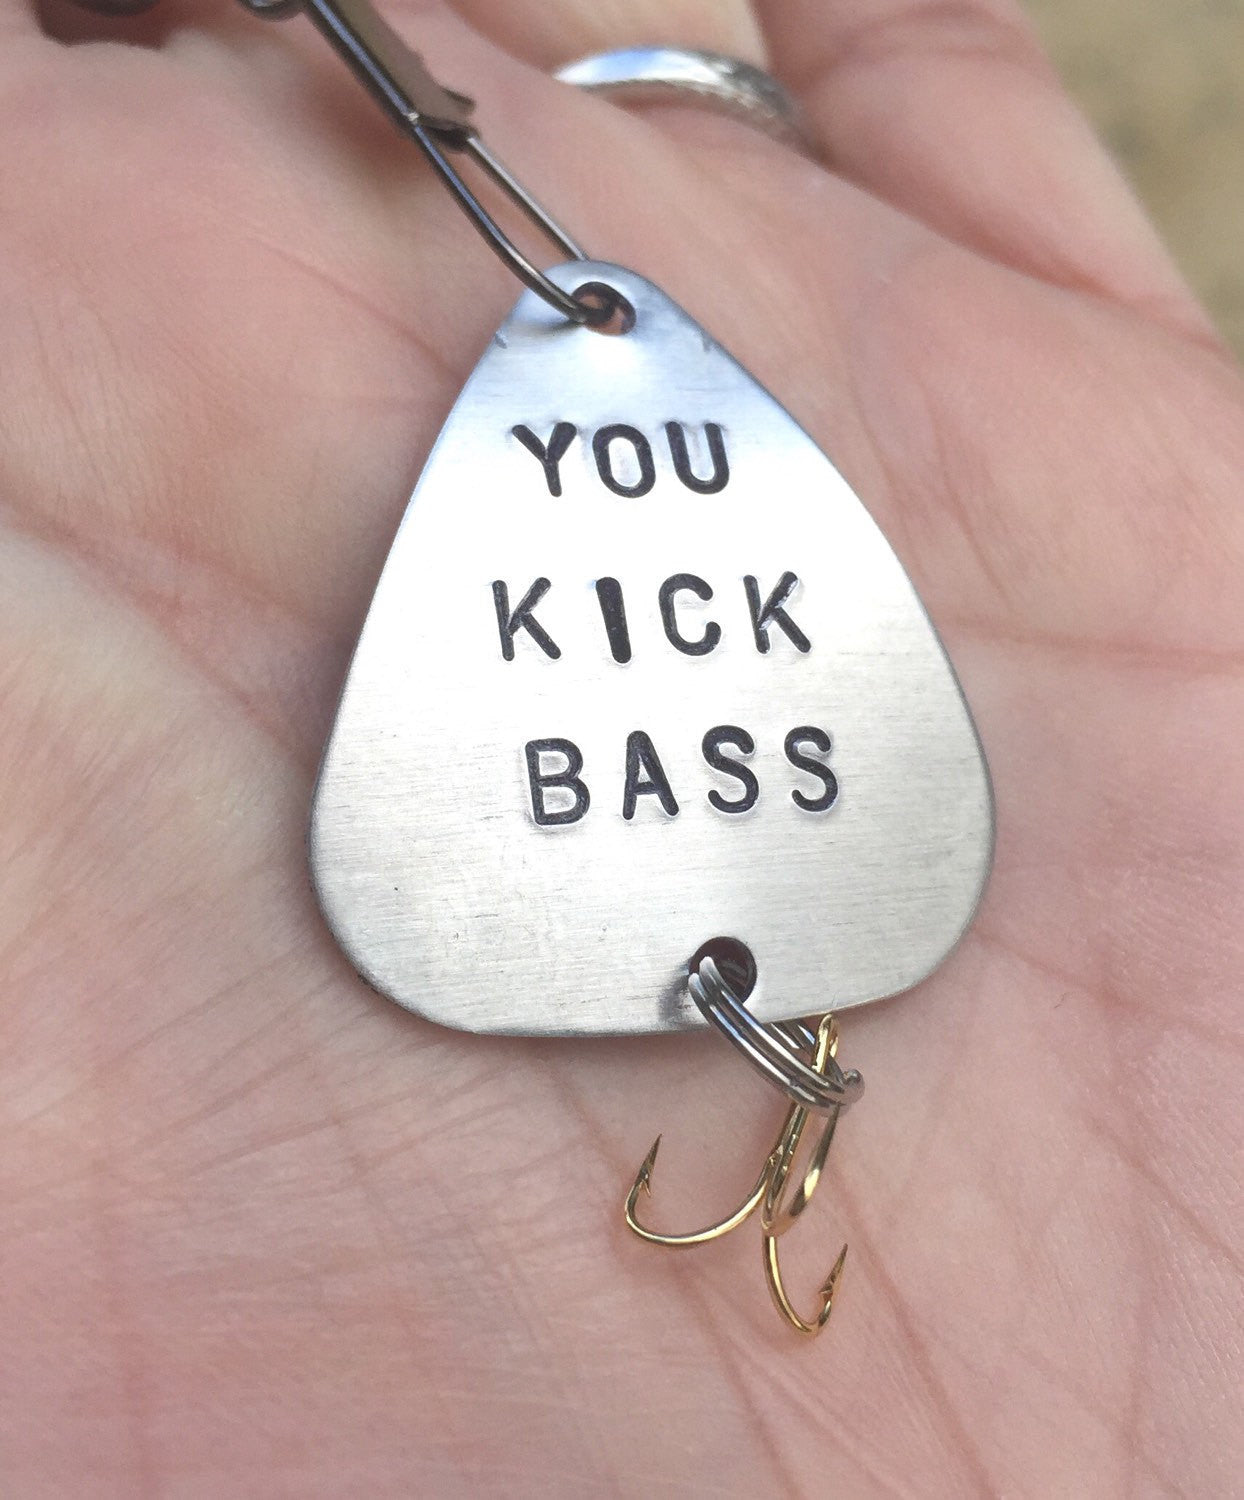 Fishing Lure,Valentine Gift,You Kick Bass, For Him, Boyfriend Gift, Personalized Fishing Lure, Hooked On Your Love,natashaaloha - Natashaaloha, jewelry, bracelets, necklace, keychains, fishing lures, gifts for men, charms, personalized, 